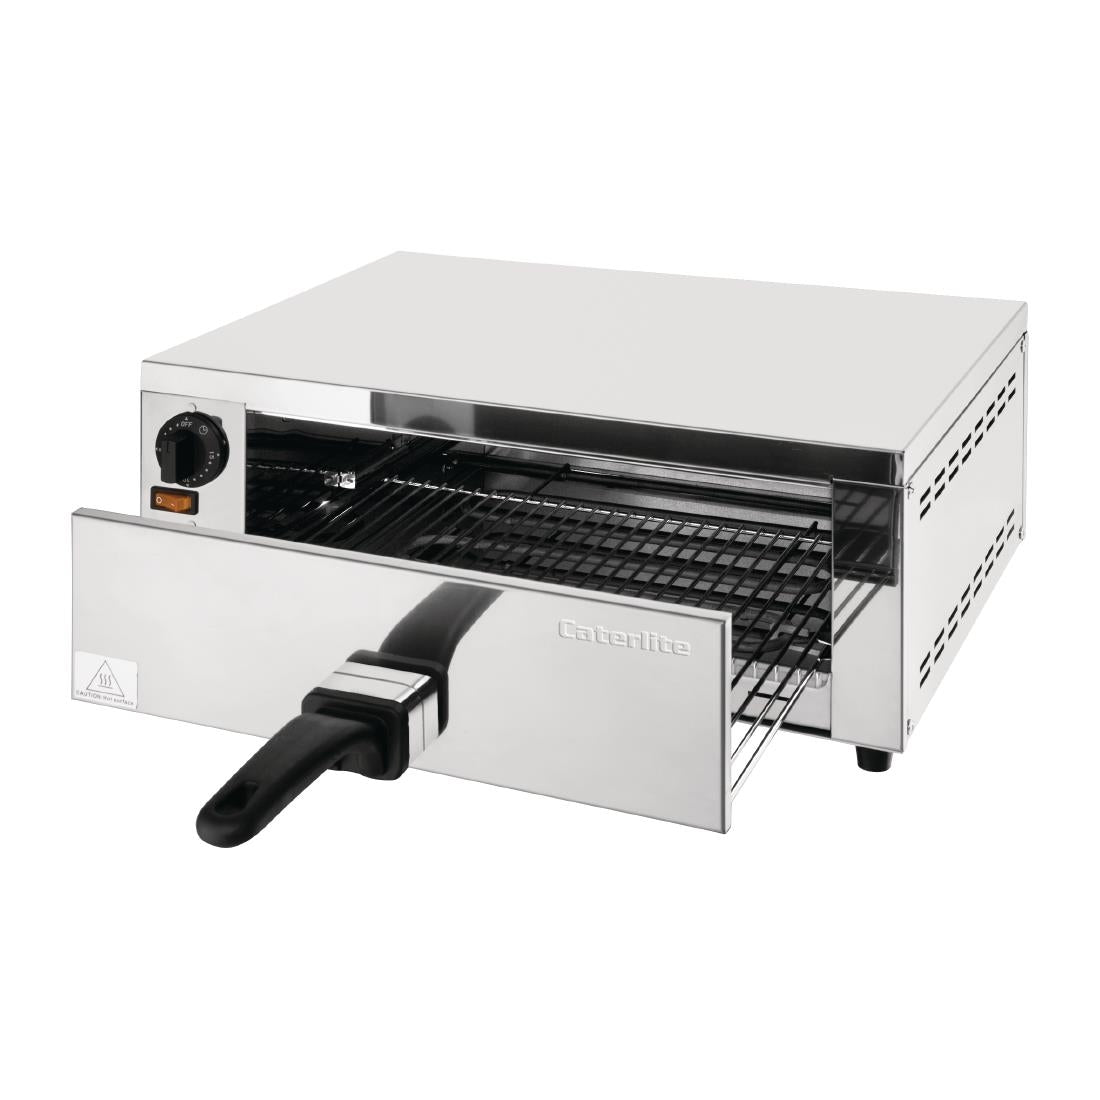 CR912 Caterlite Pizza Oven JD Catering Equipment Solutions Ltd